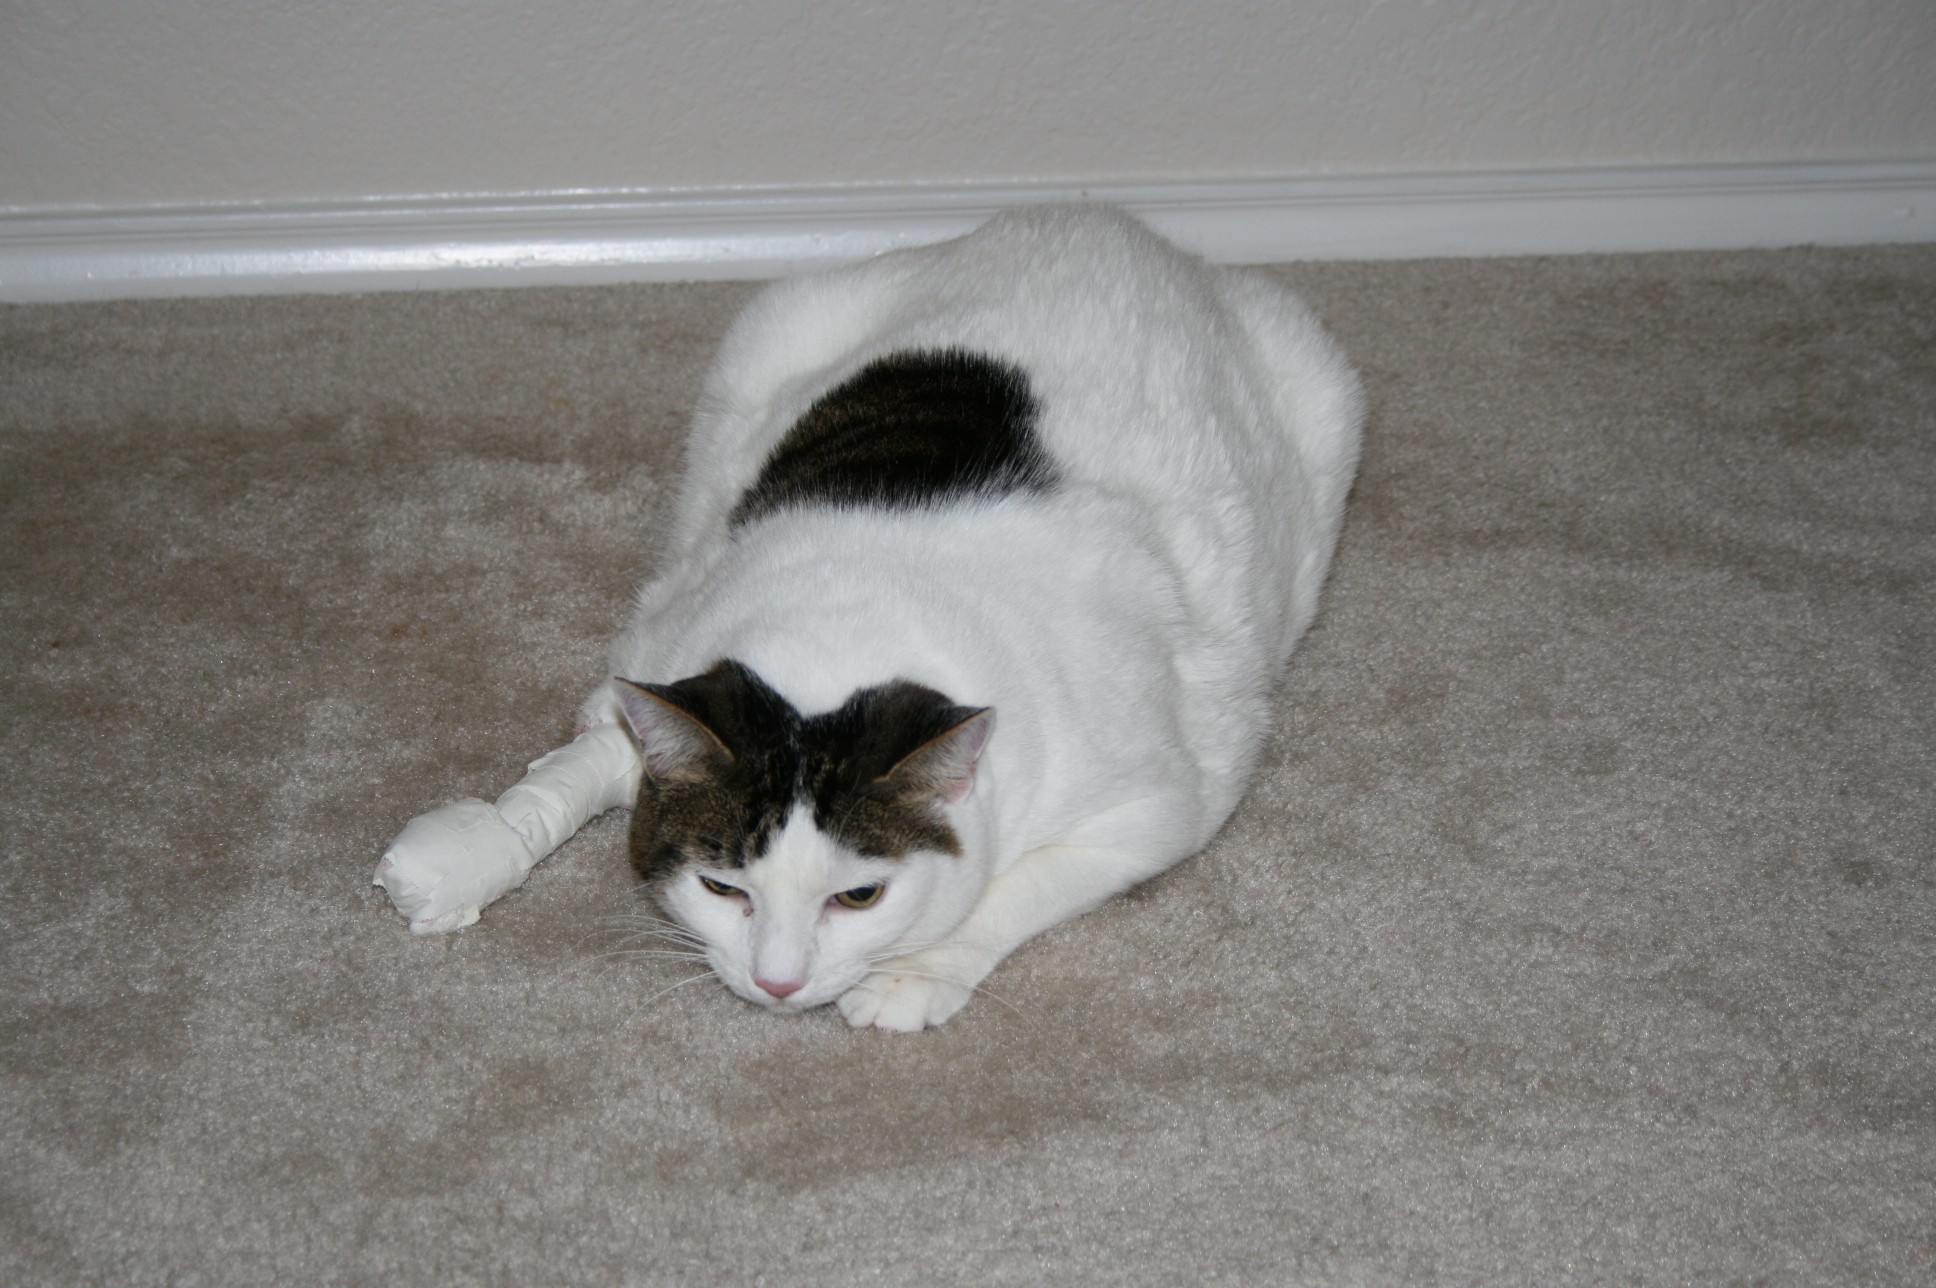 the black and white cat is laying down on the carpet